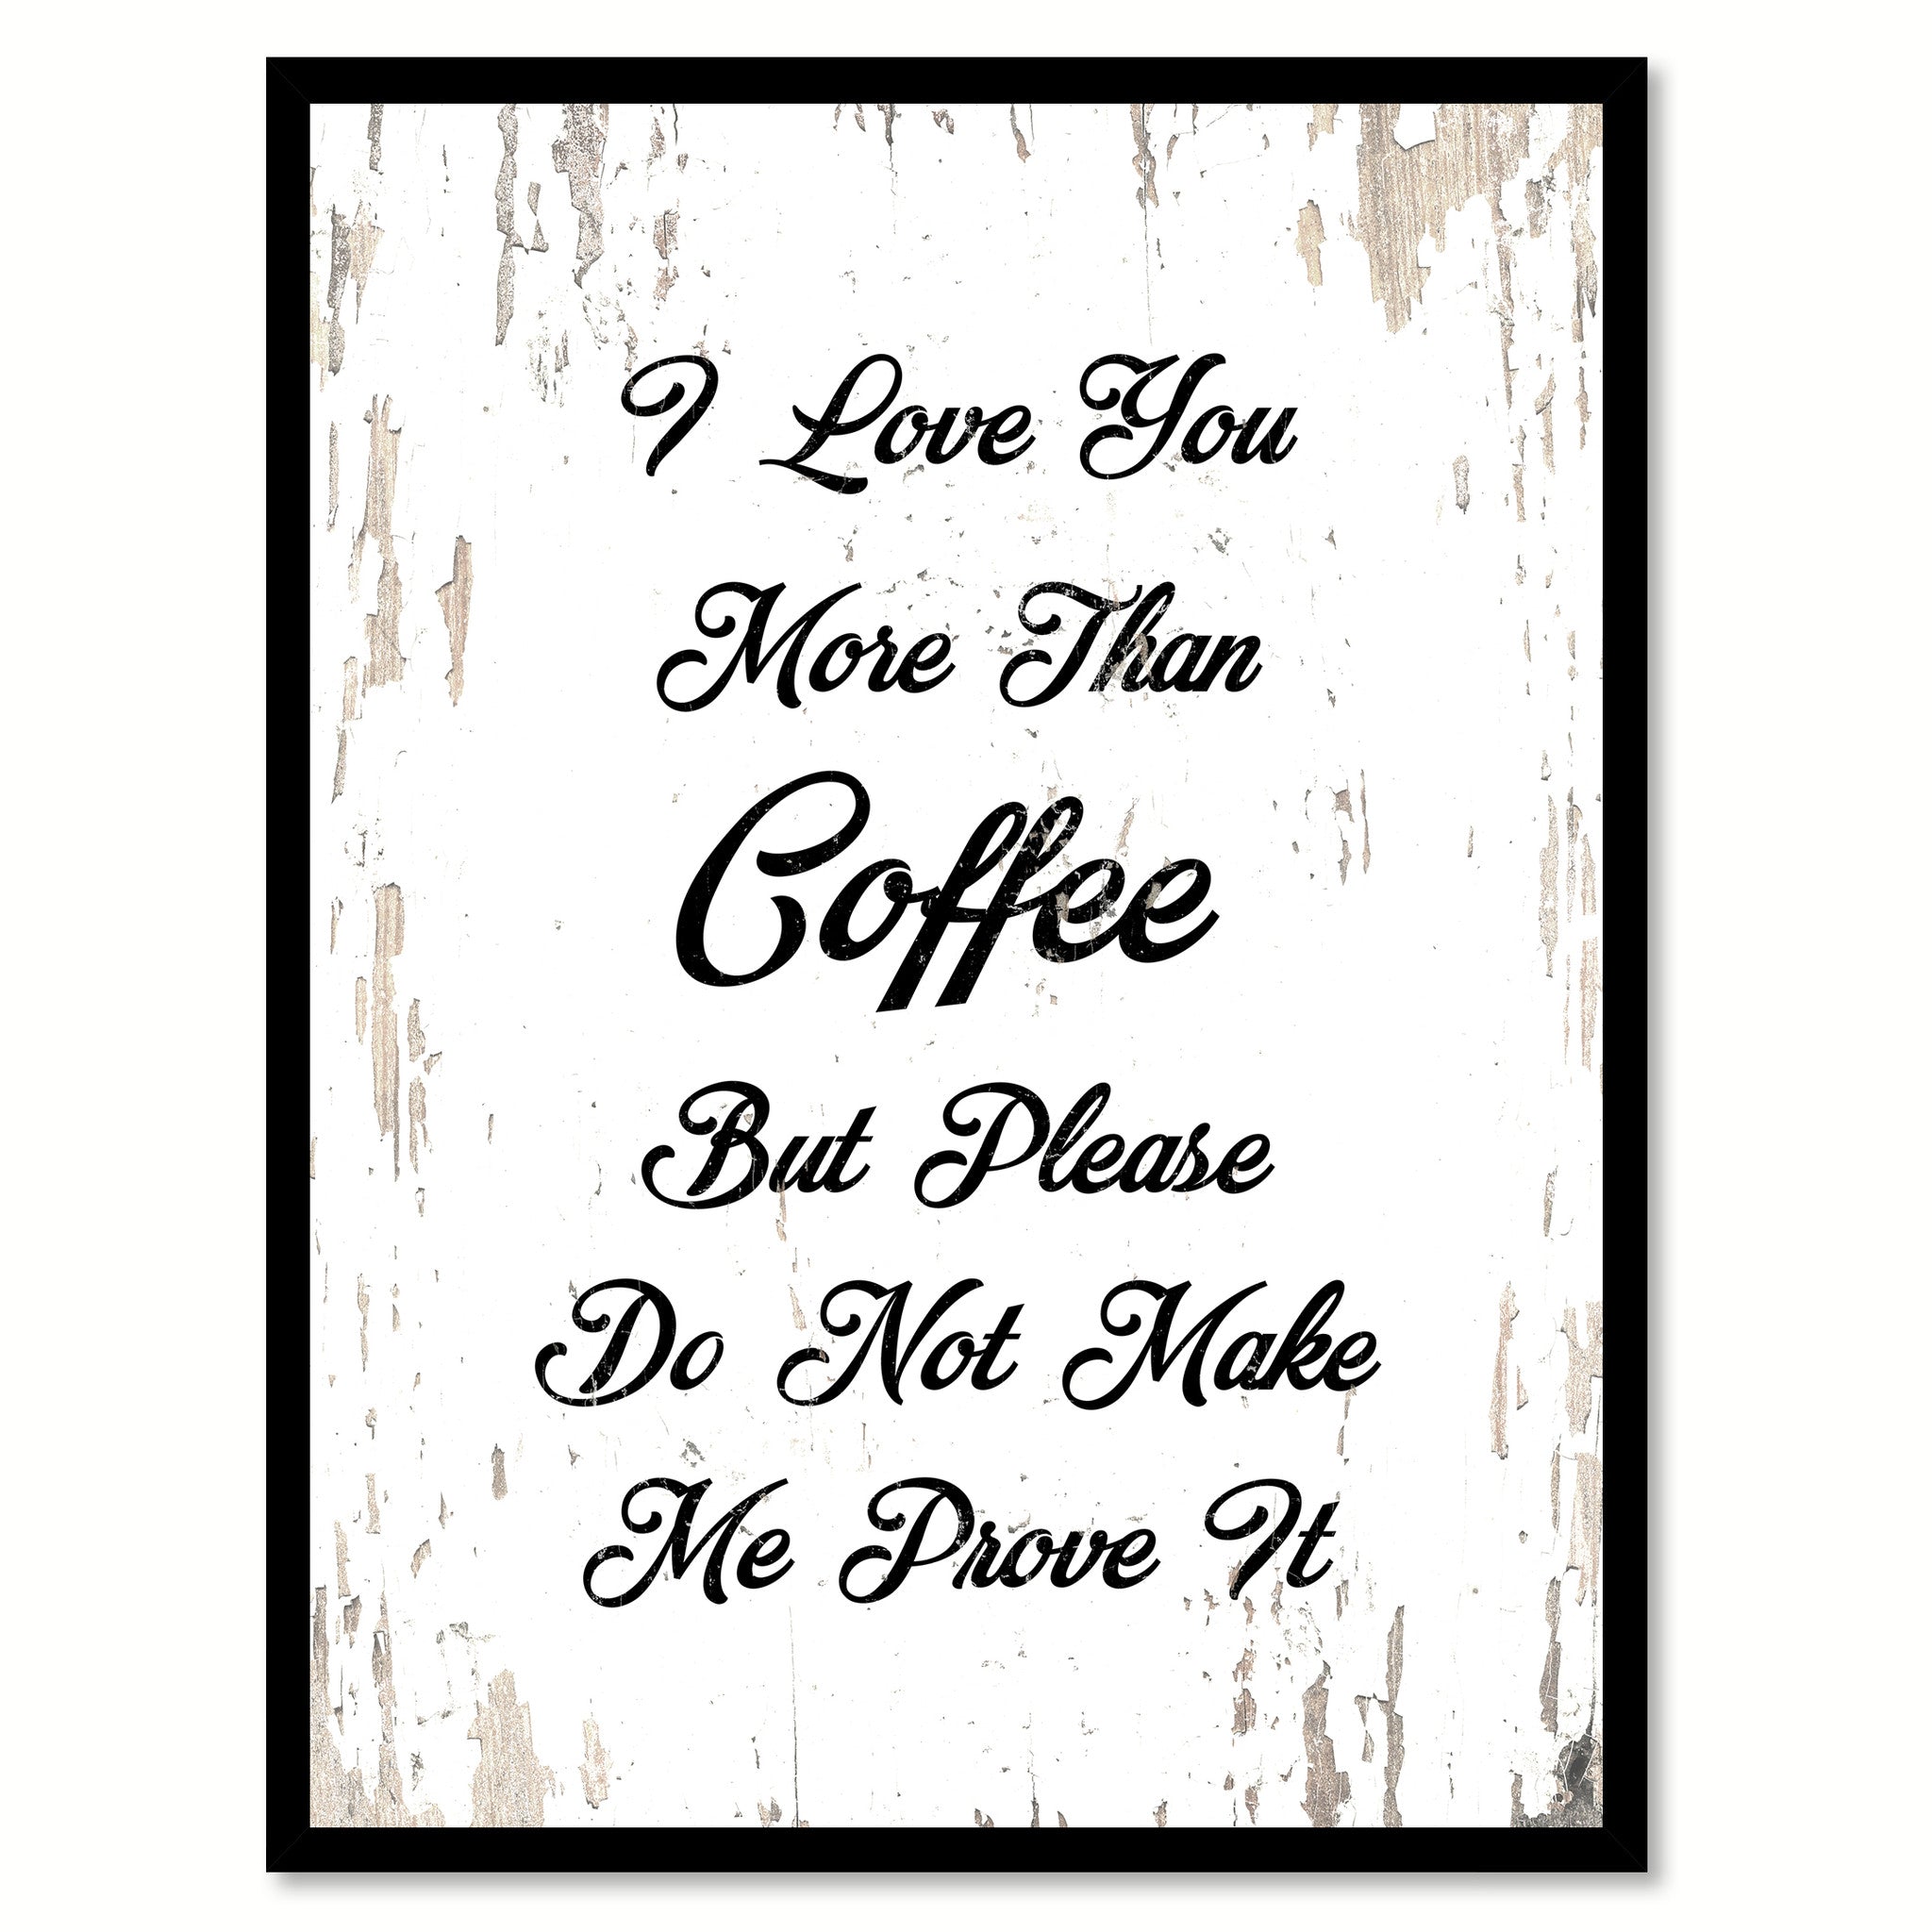 I Love You More Than Coffee But Please Don't Make Me Prove It Quote Saying Canvas Print with Picture Frame